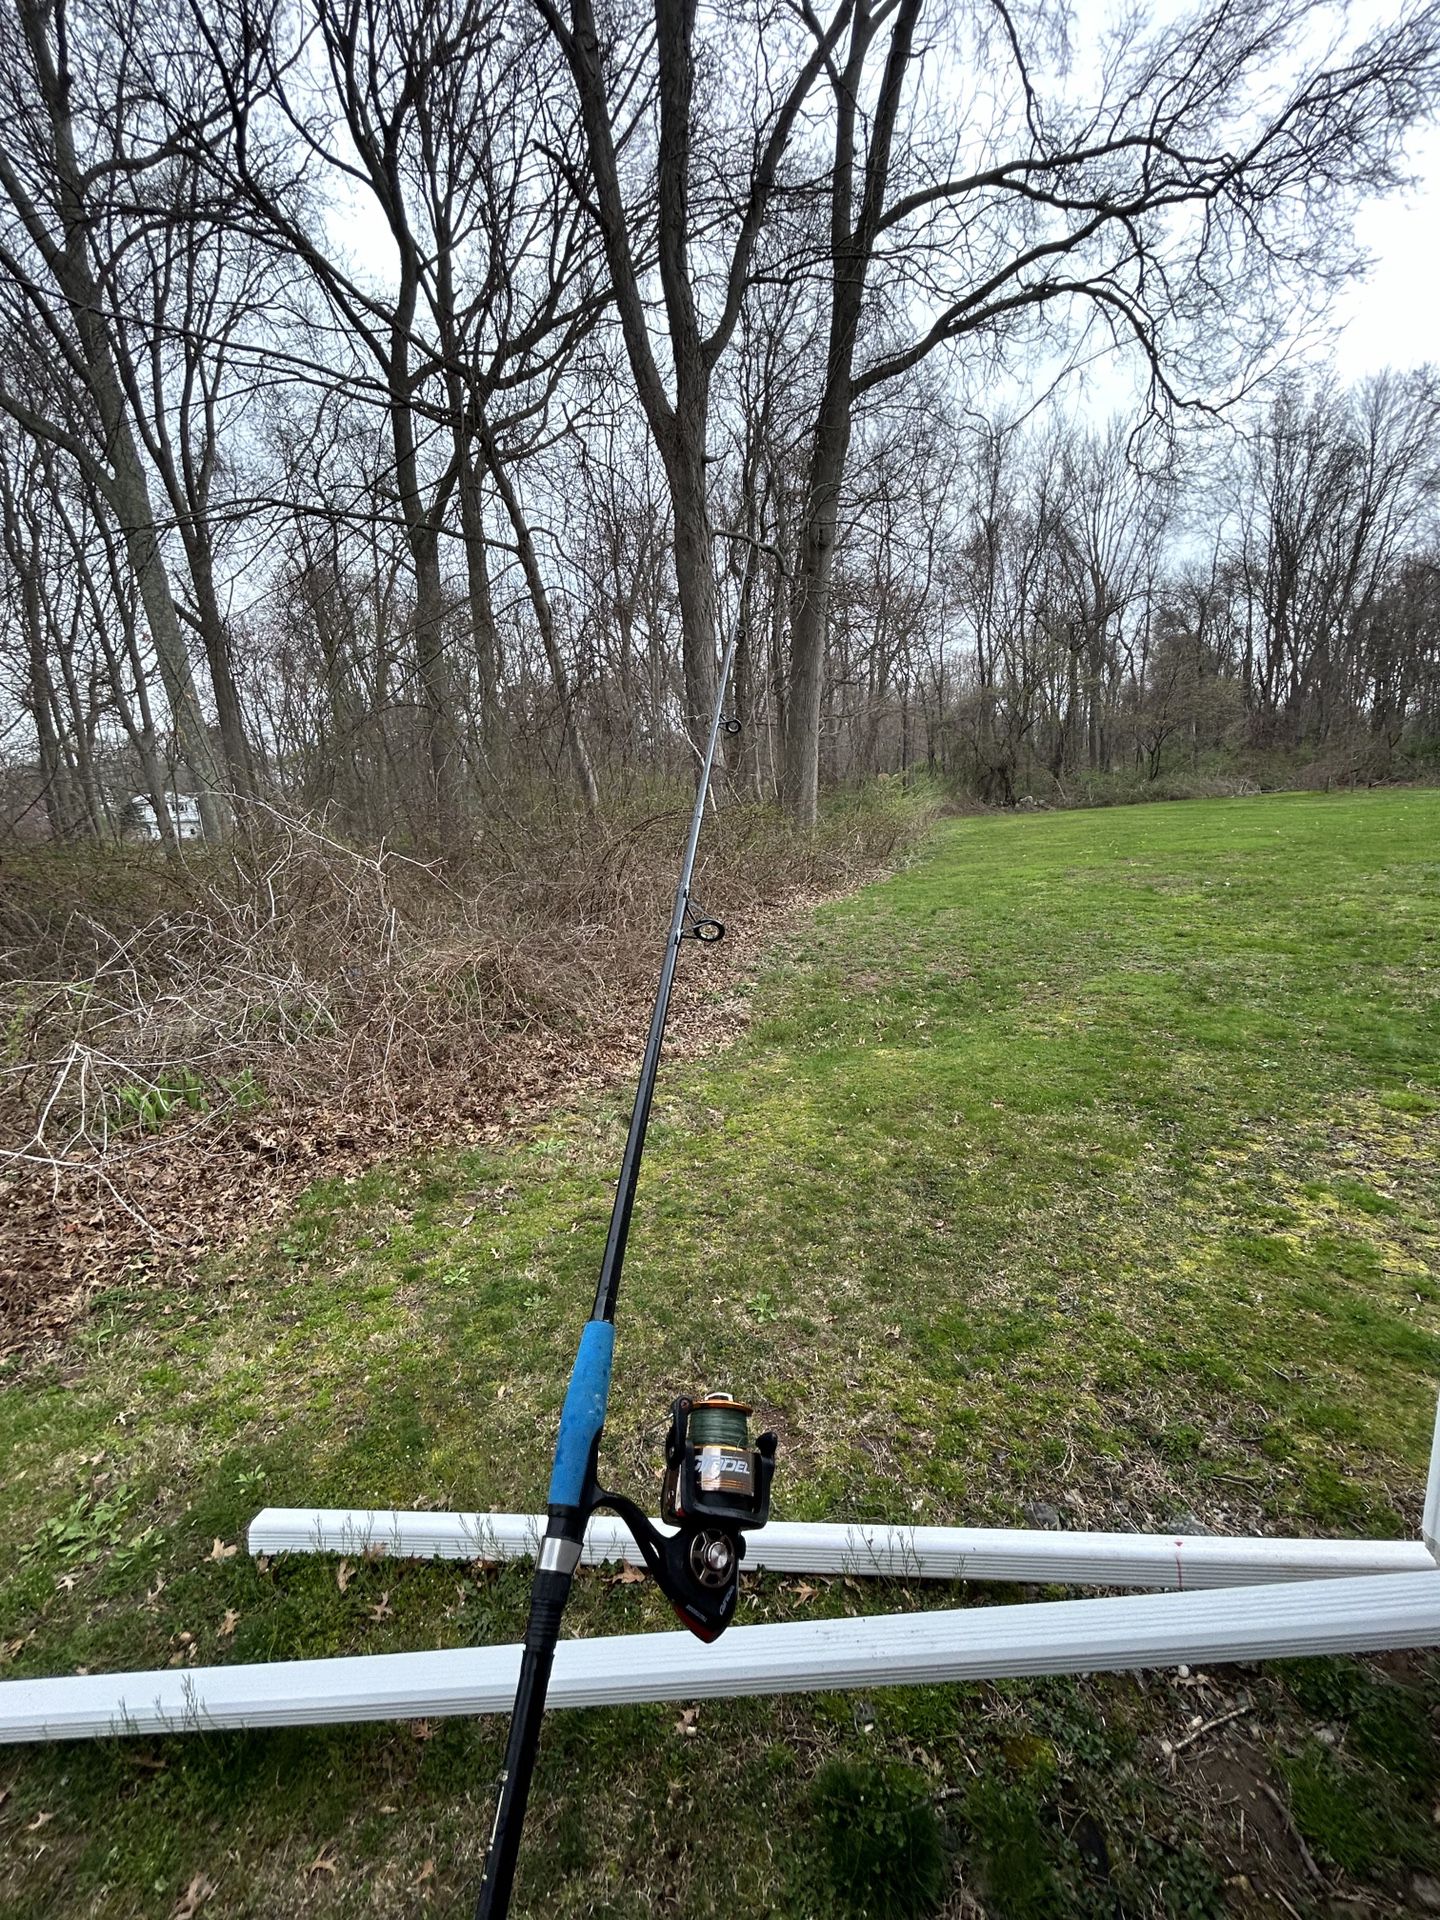 7ft Custom Fishing Rod Willing To Negotiat And Take Trades